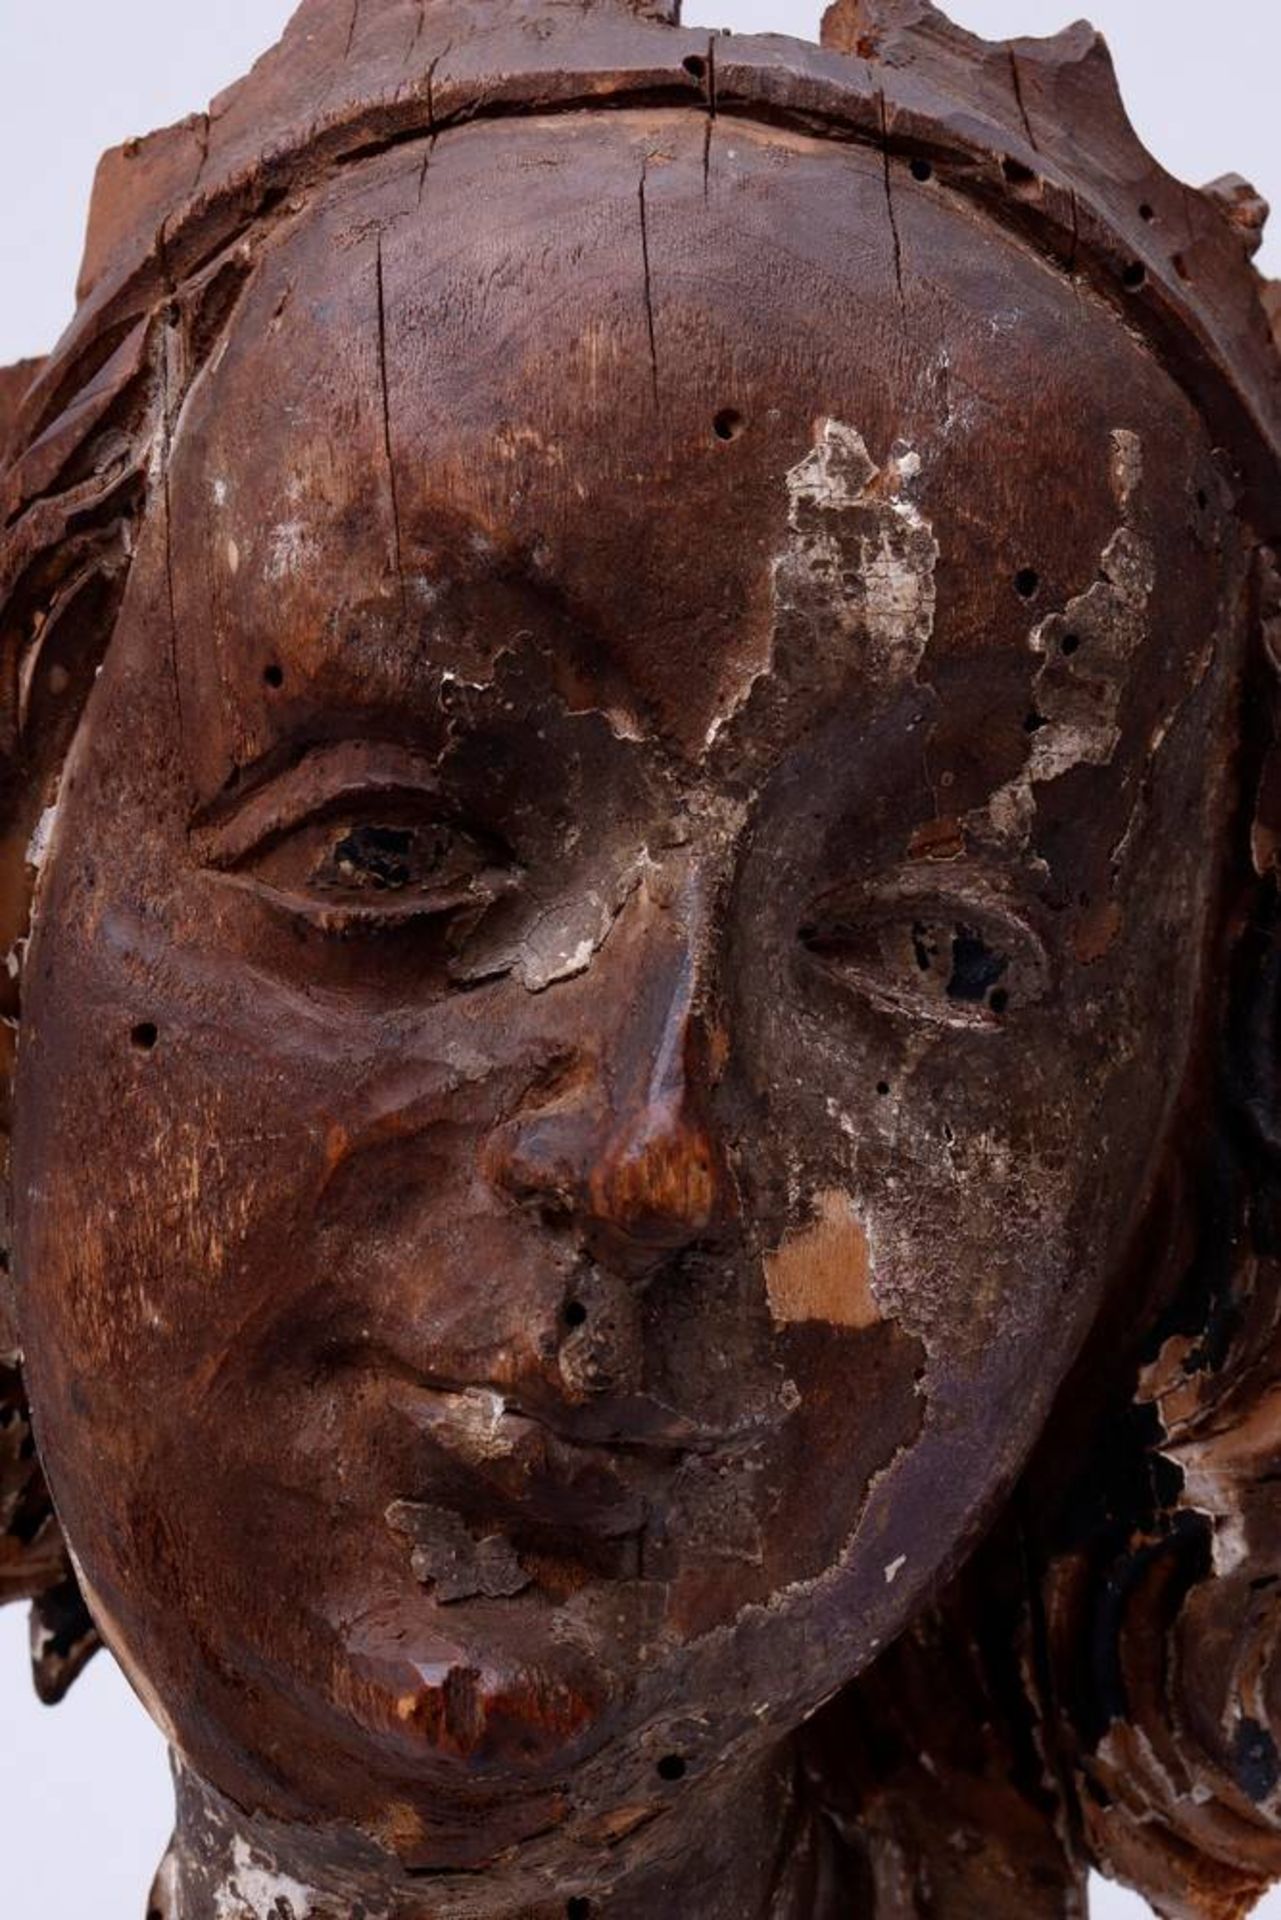 Mater Dolorosaposs. south german, 17th C., carved wood, painted in colours, head fragment, H 23cm, - Bild 3 aus 4